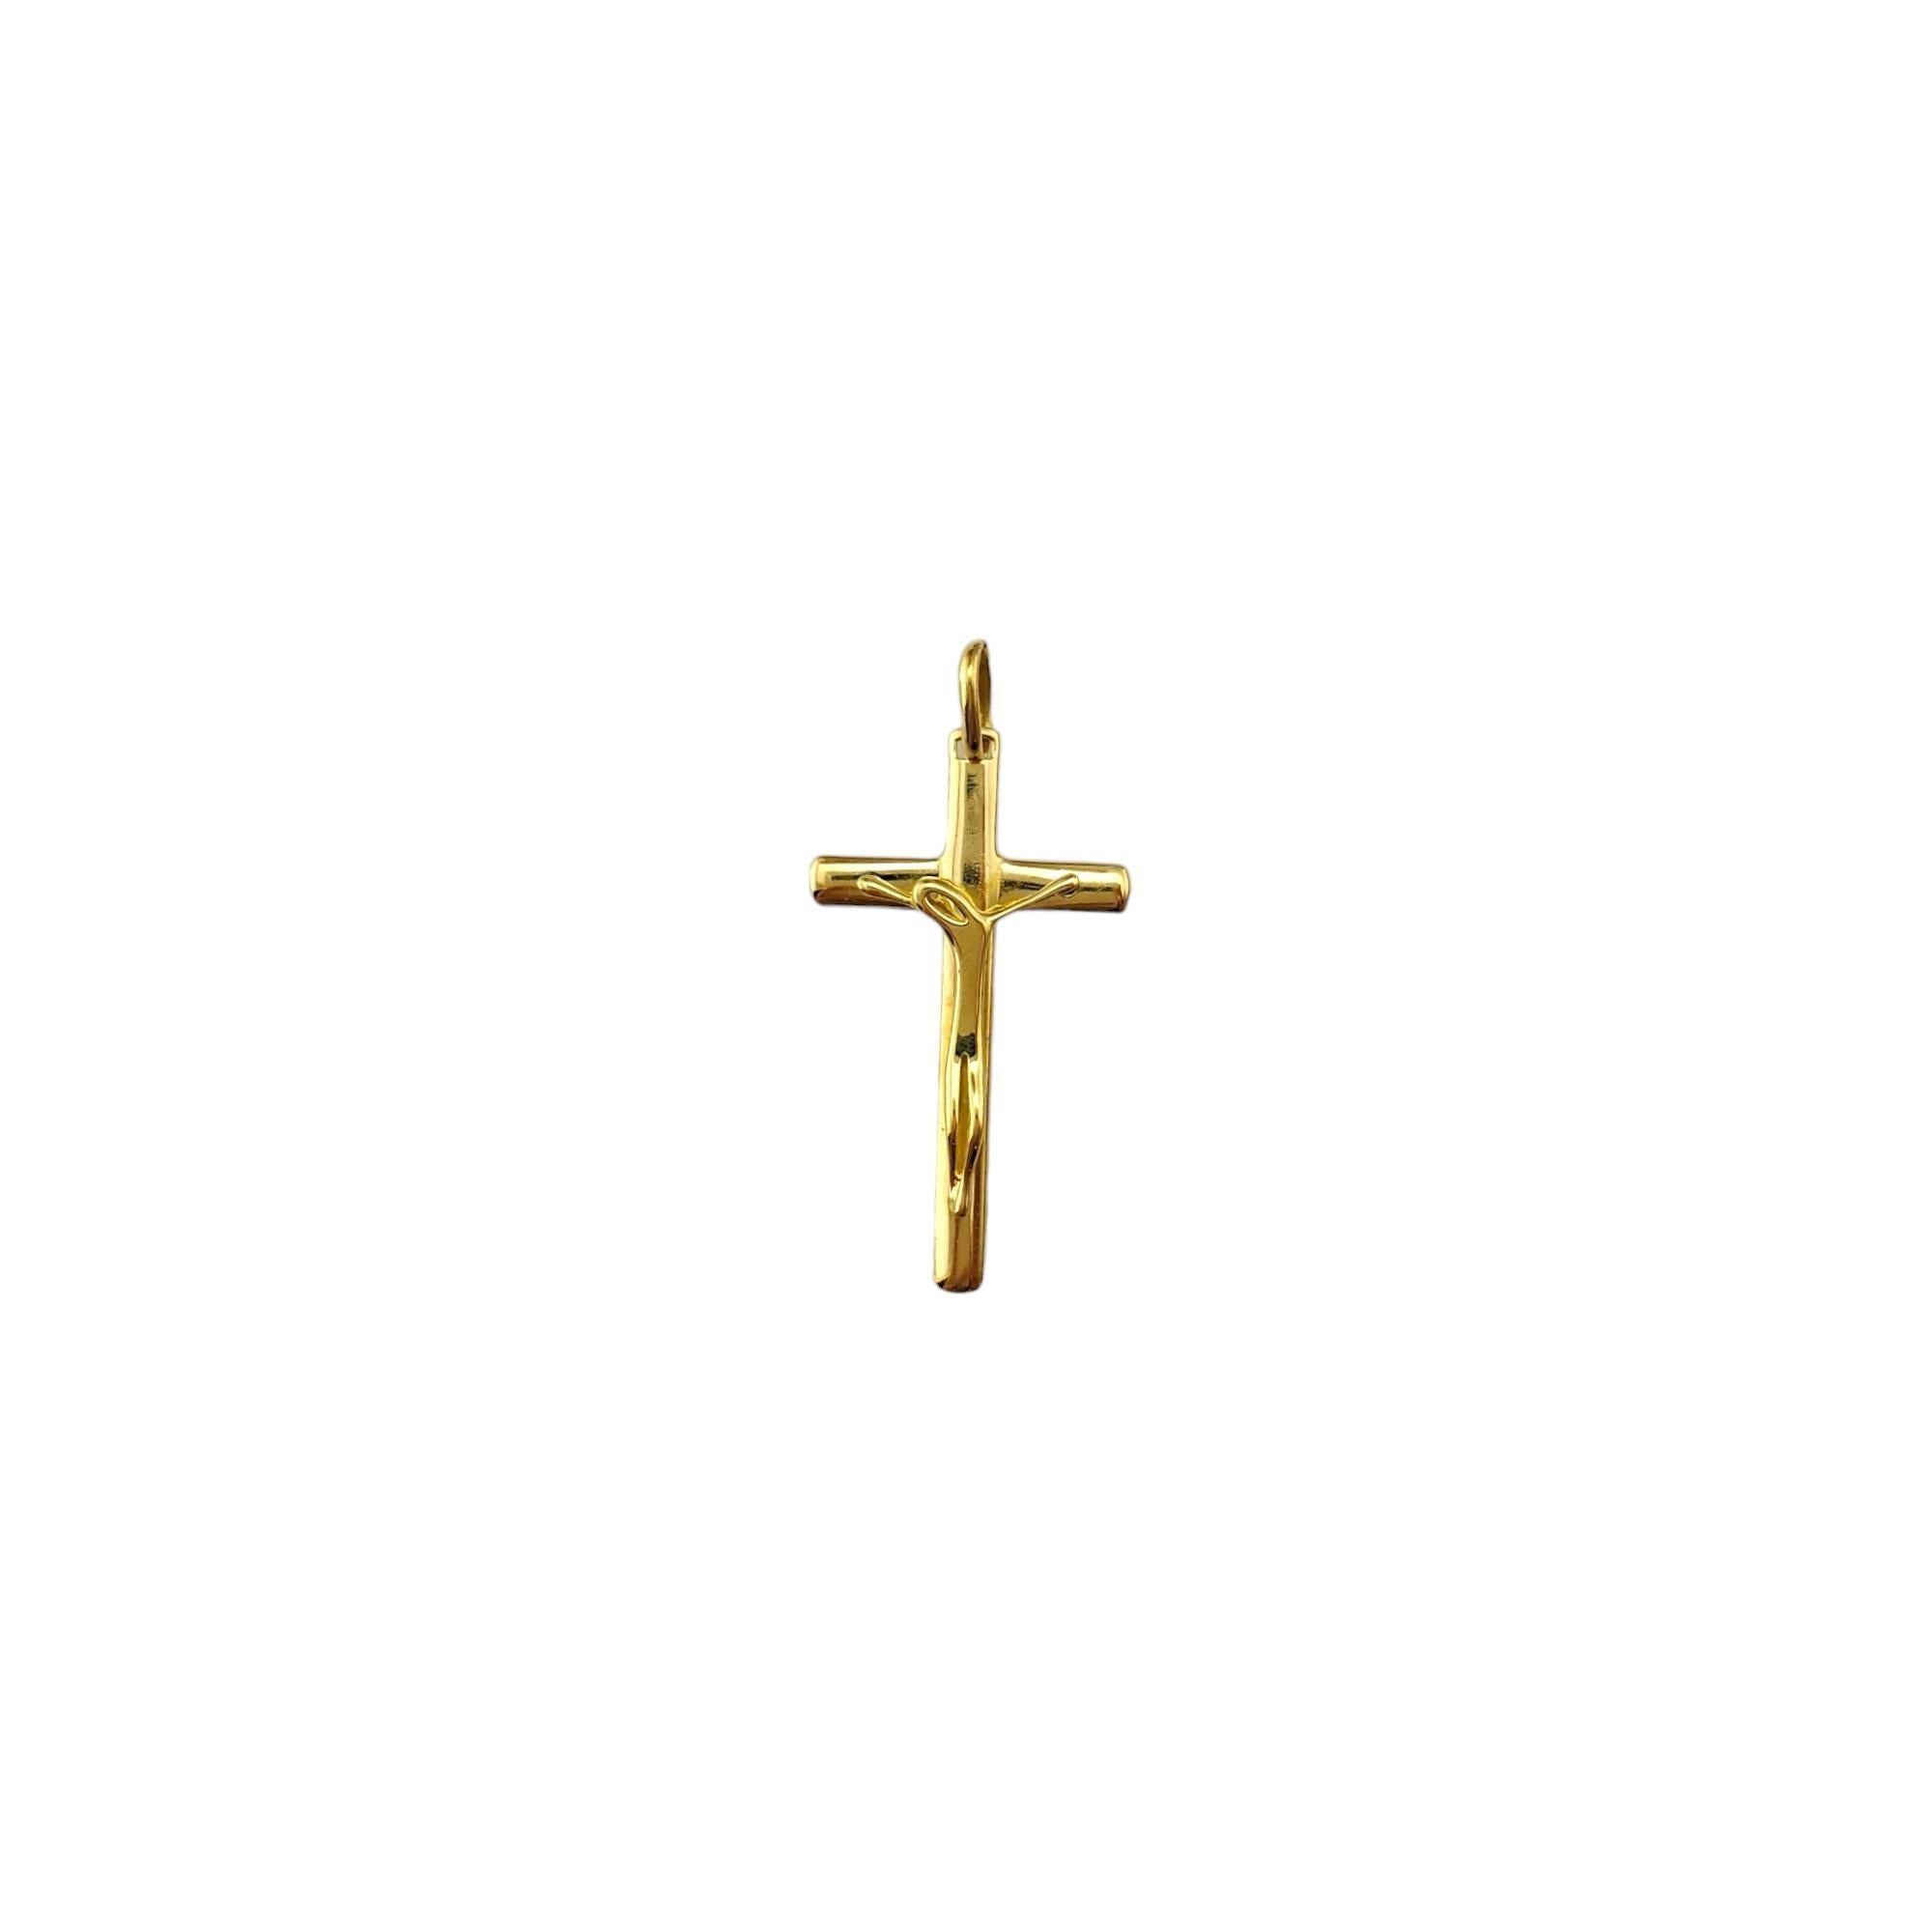 18K Yellow Gold Stylized Crucifix Charm

Modern charm with a stylized depiction of the Crucifix in 18K yellow gold.

Hallmark: 750

Weight: 1.84 dwt/2.86 g

Length w/ bail: 41.81 mm

Size: 35.25 mm X 20.18 mm X 3.4 mm

Very good condition,